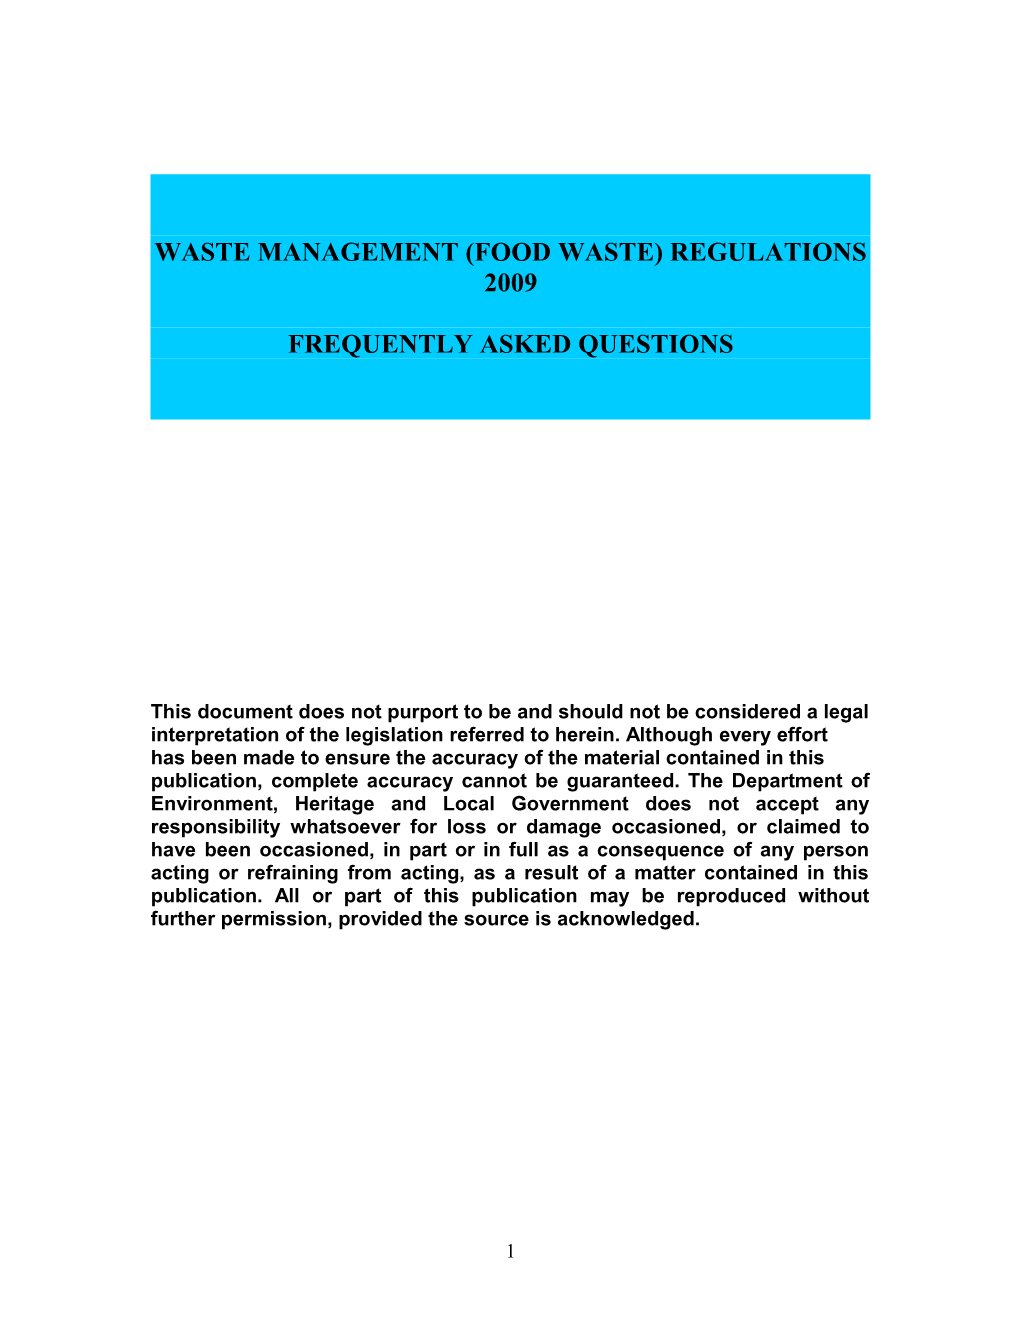 Food Waste Regulations Comments/Questions